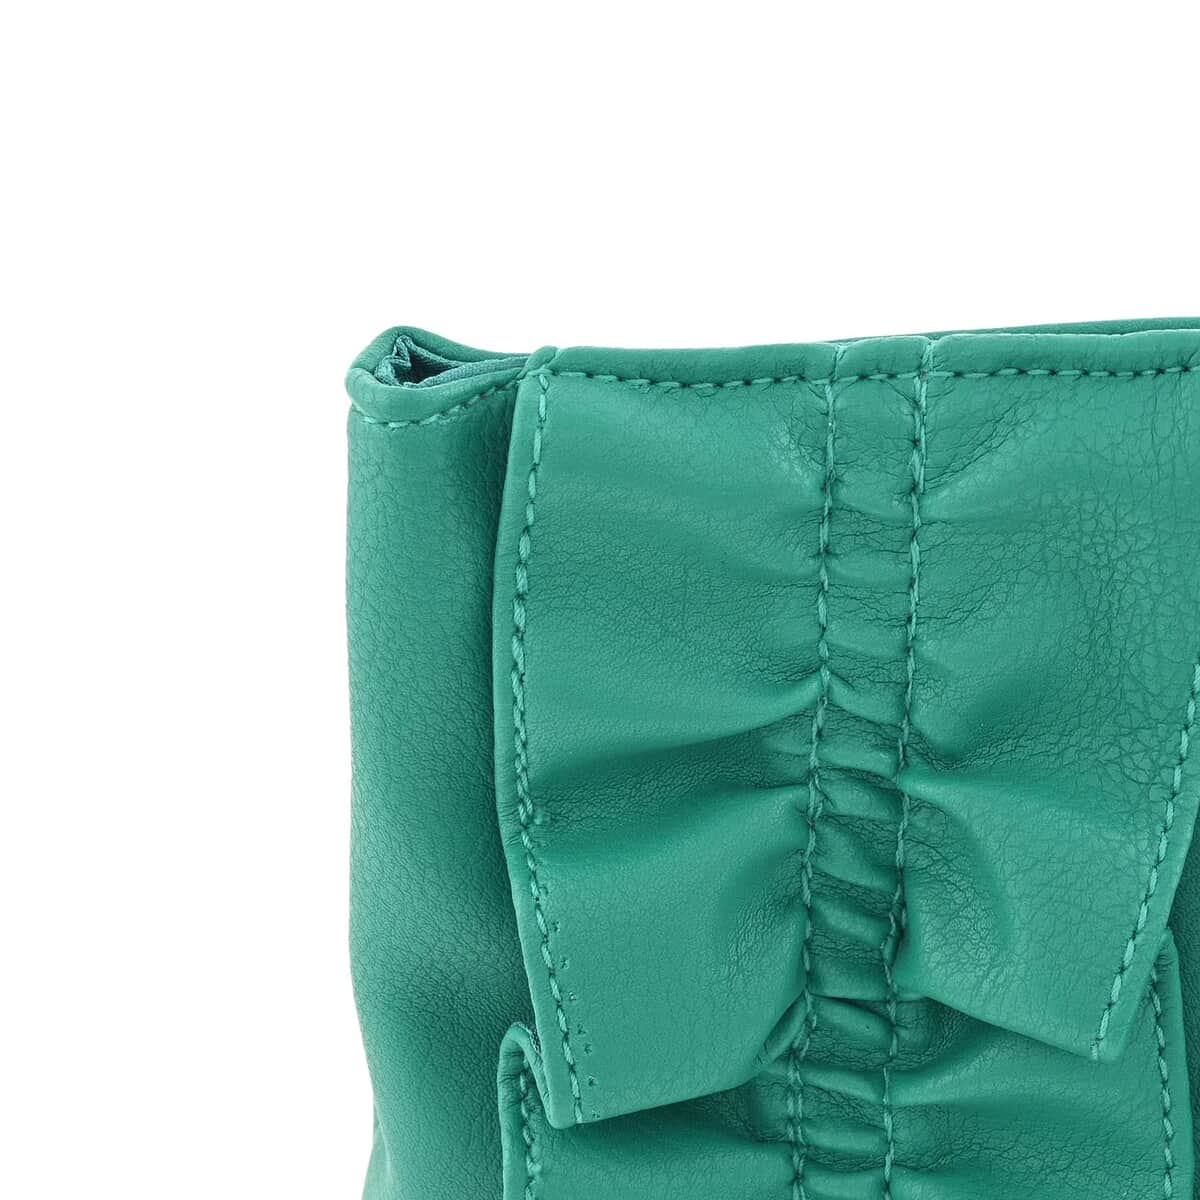 Green Faux Leather Clutch (12"x7") image number 4